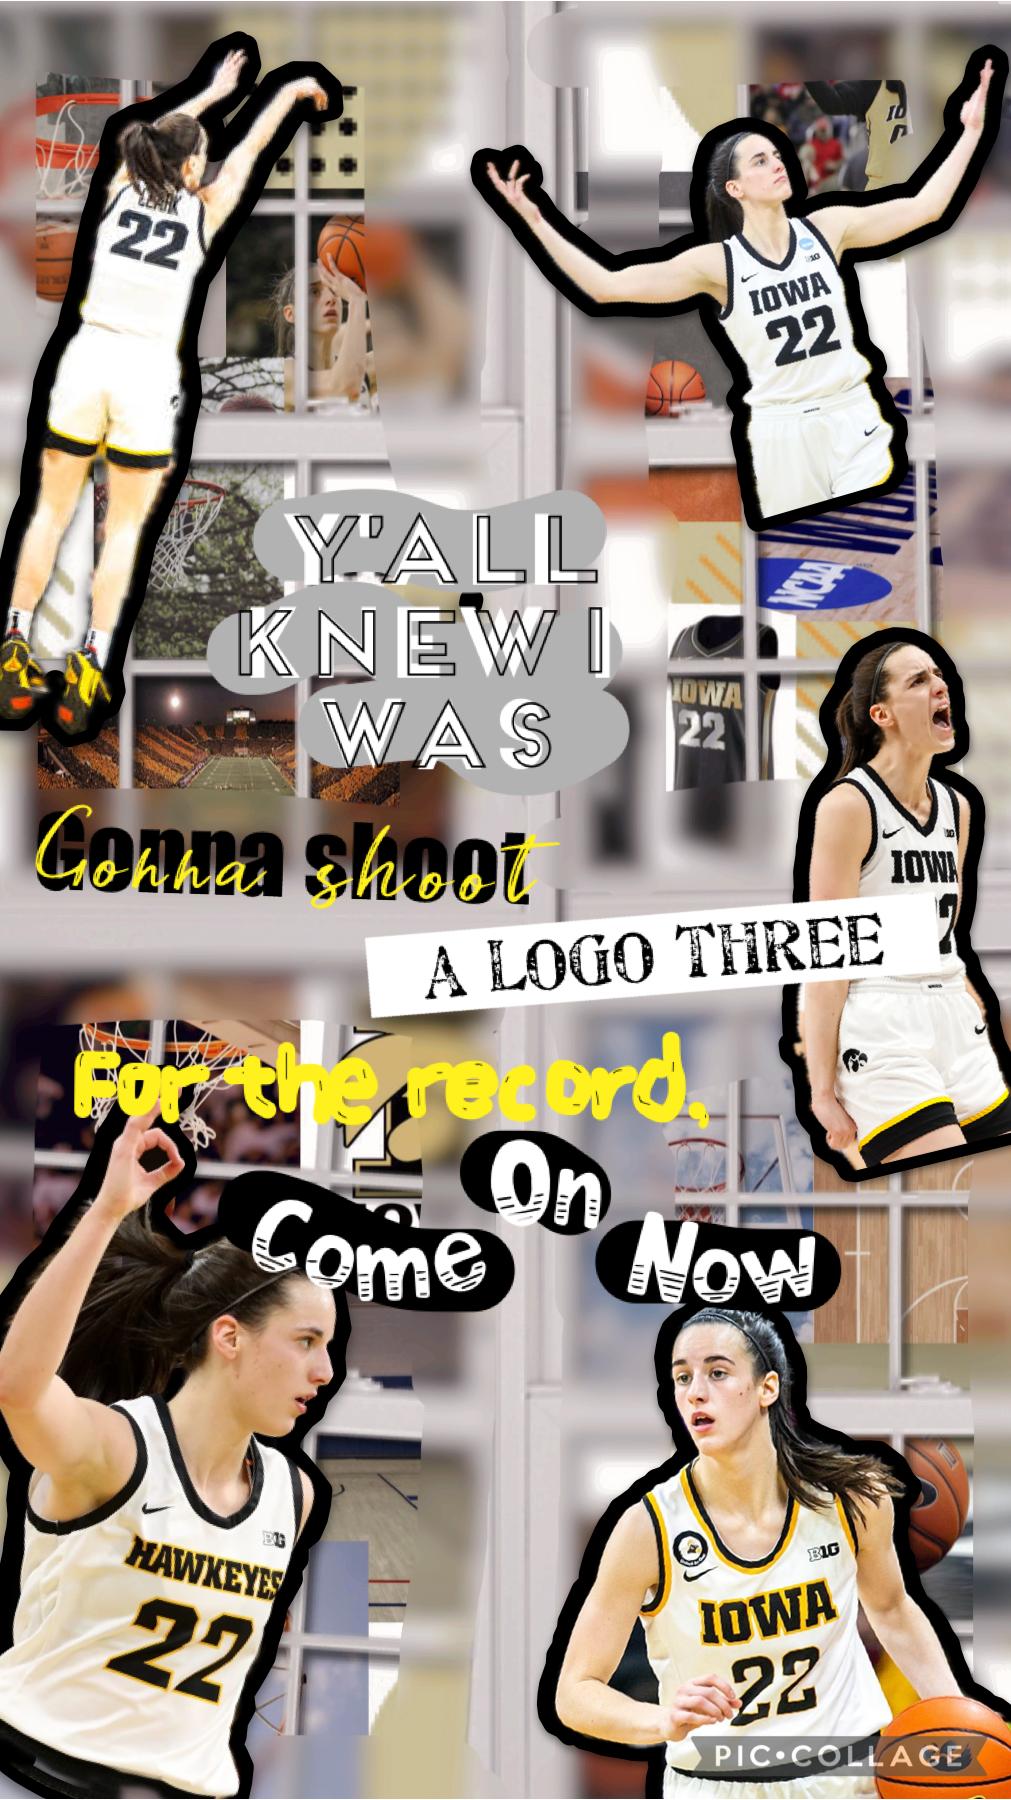 Caitlin Clark! 🏀Tap 👇
Hey guys it’s been toooo long!! I’ve been super busy with basketball and school so I haven’t really had the time to make any collages! This is the first one I’ve mad in a while and I’ve missed it!